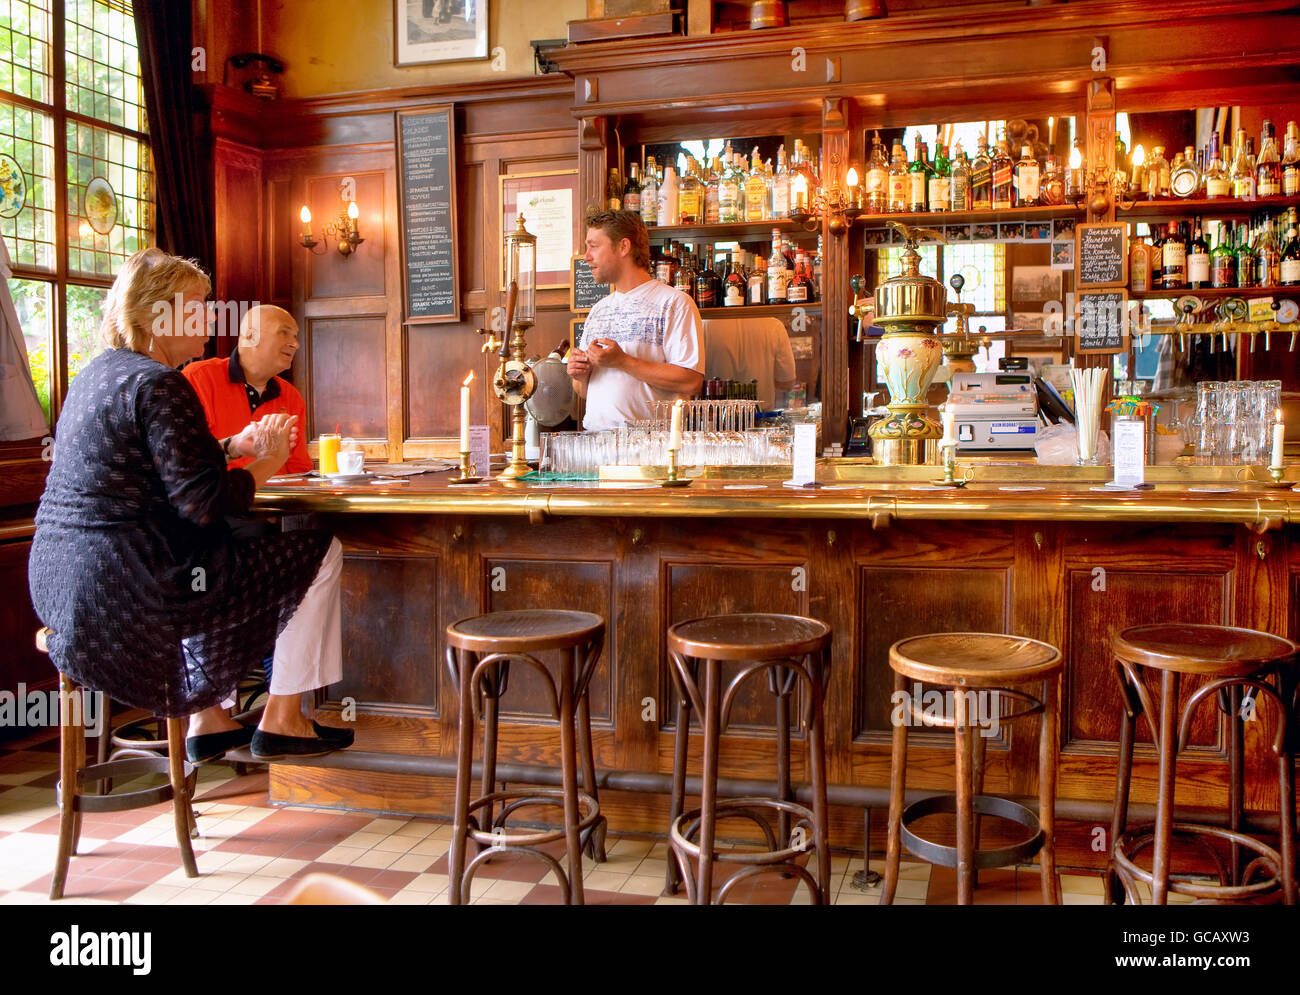 The t' Smalle cafe in Jordaan district, Amsterdam Stock Photo - Alamy